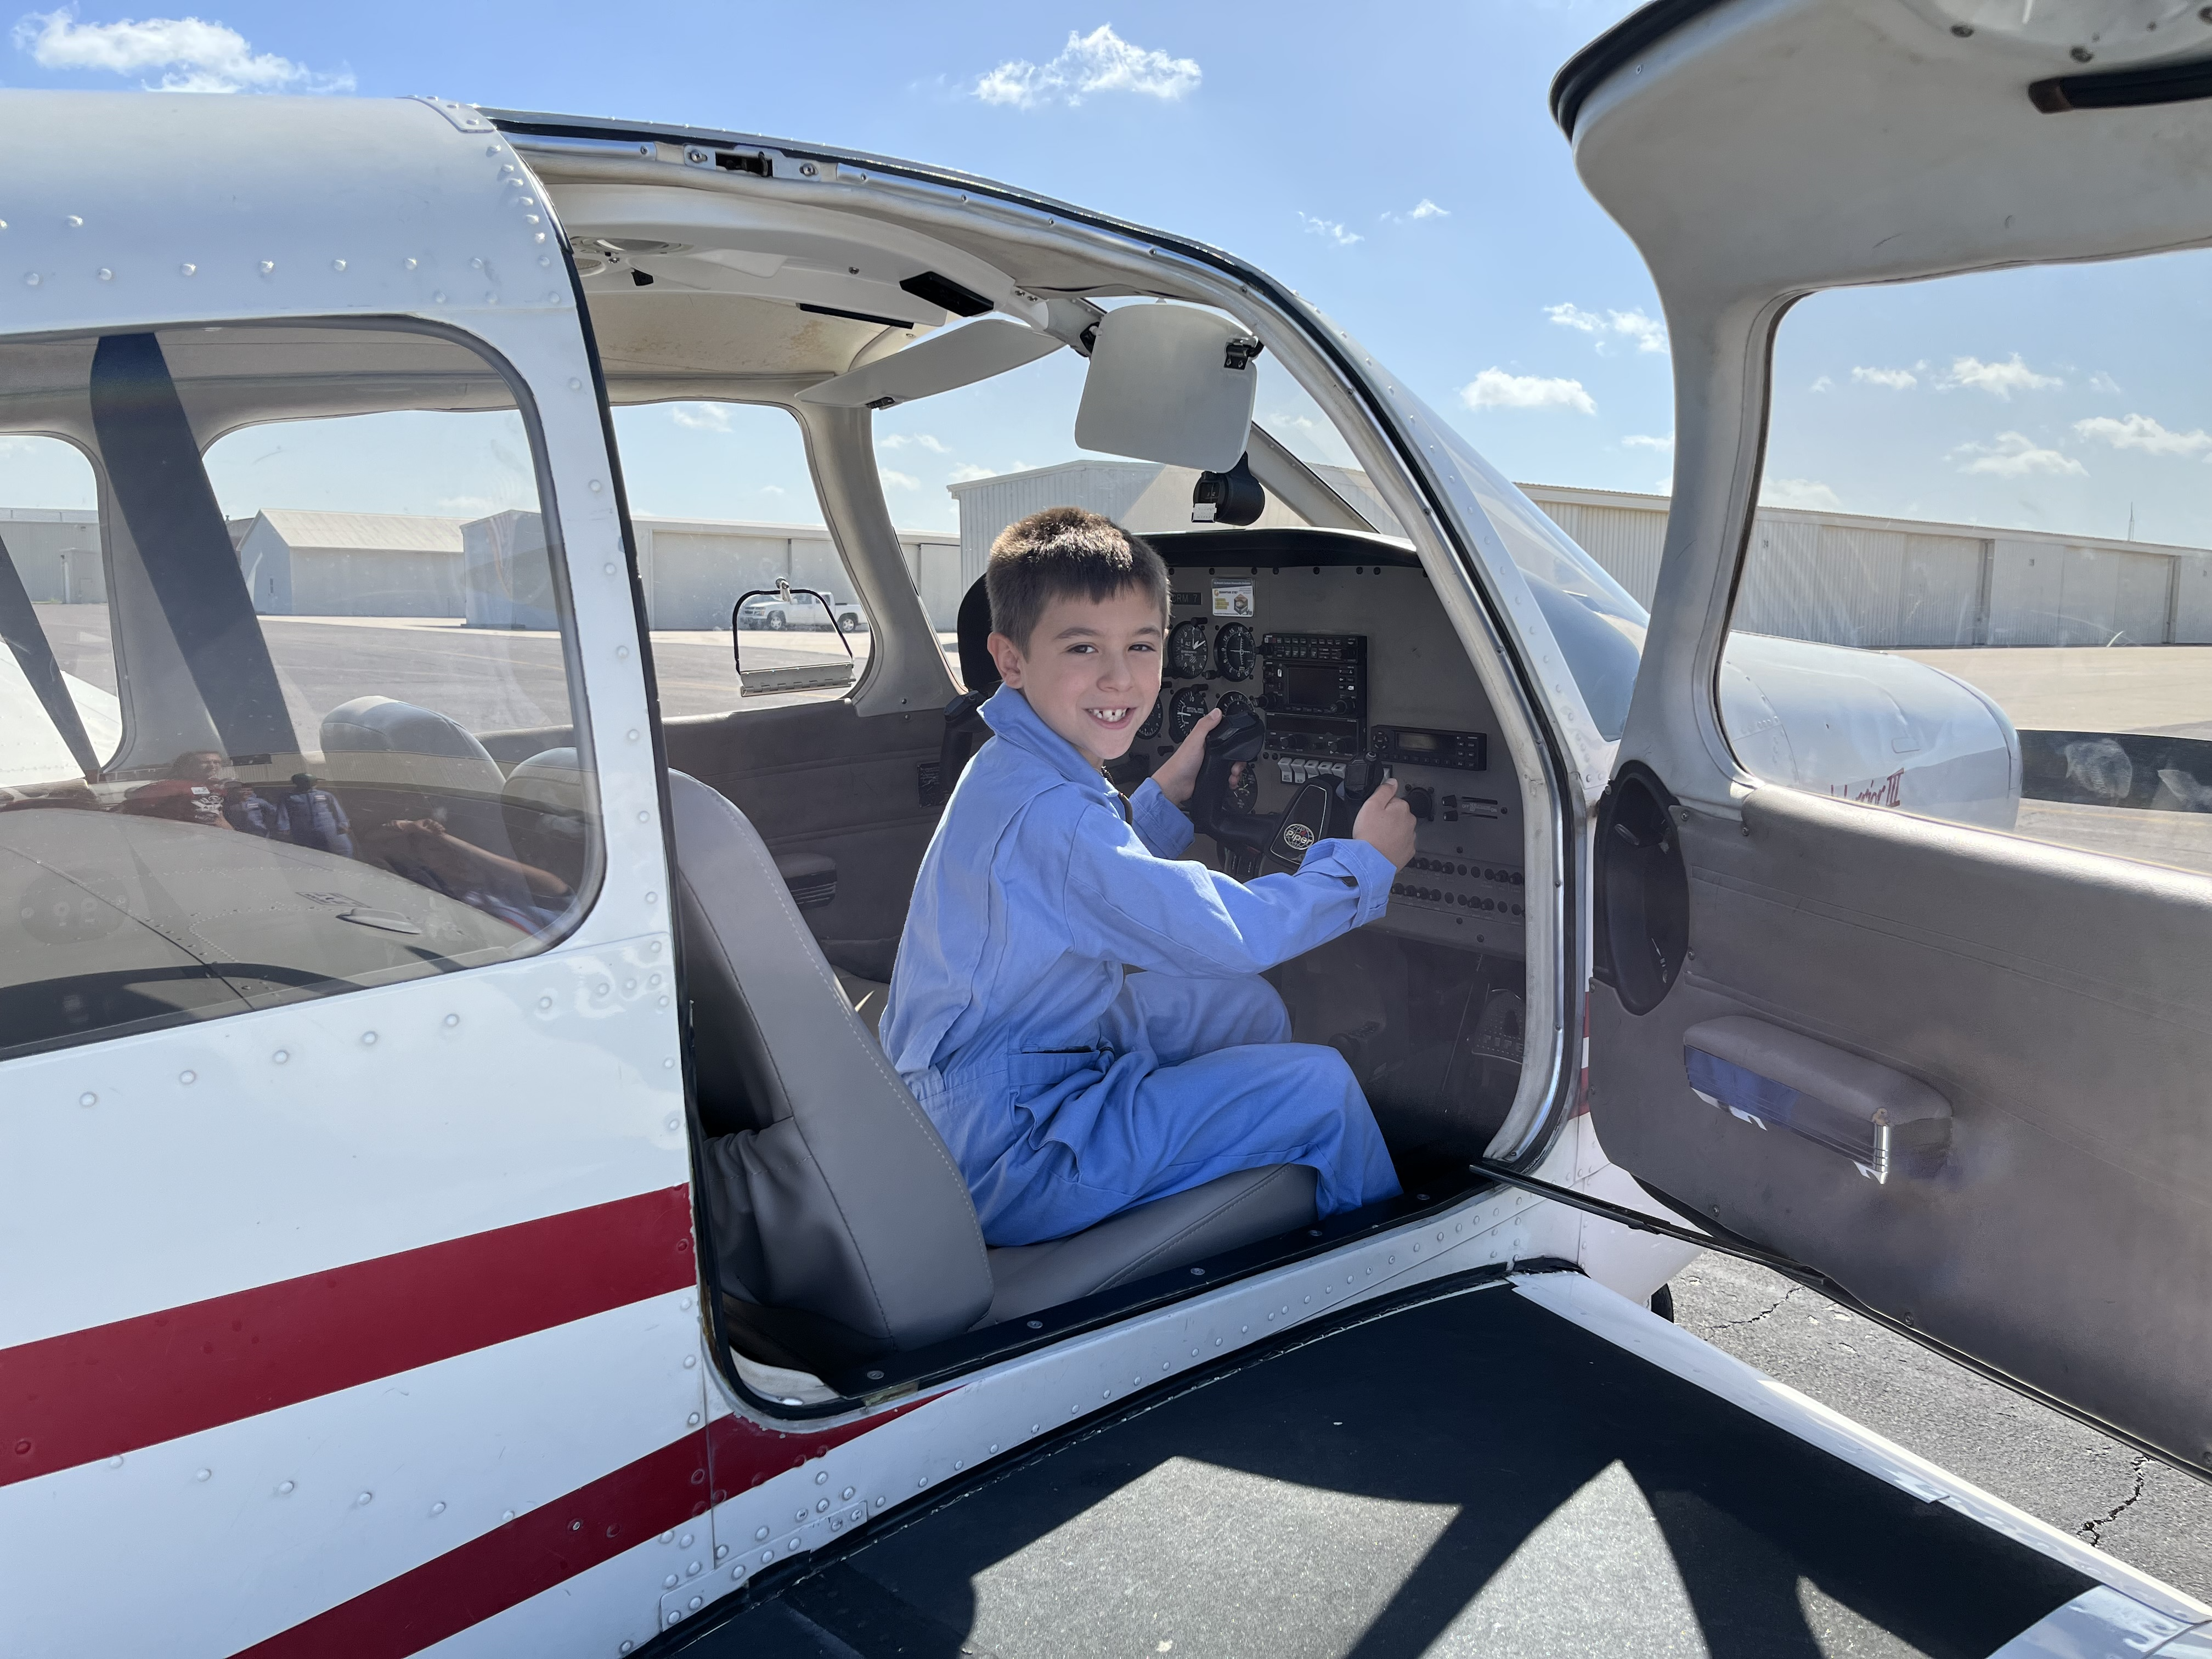 K-12 Sooner Flight Academy Student in the cockpit of an Piper PA-28-161 Warrior III